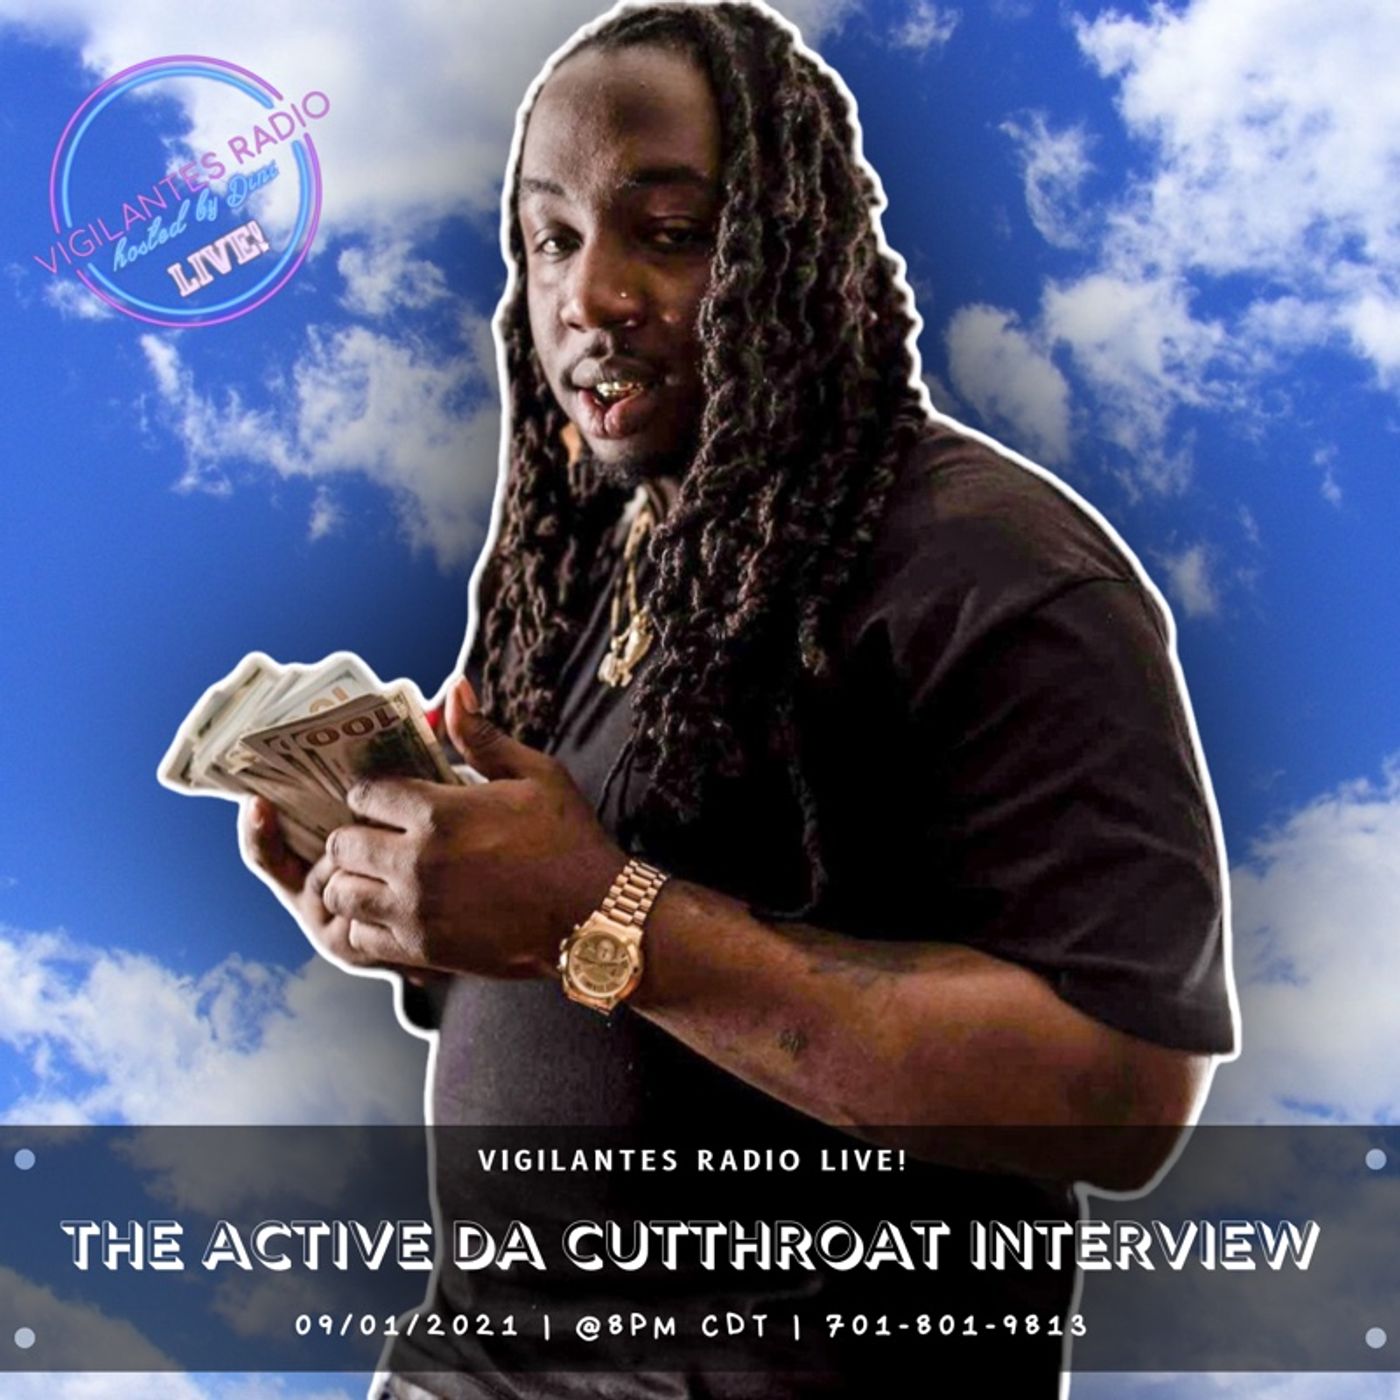 The Active Da Cutthroat Interview. Image